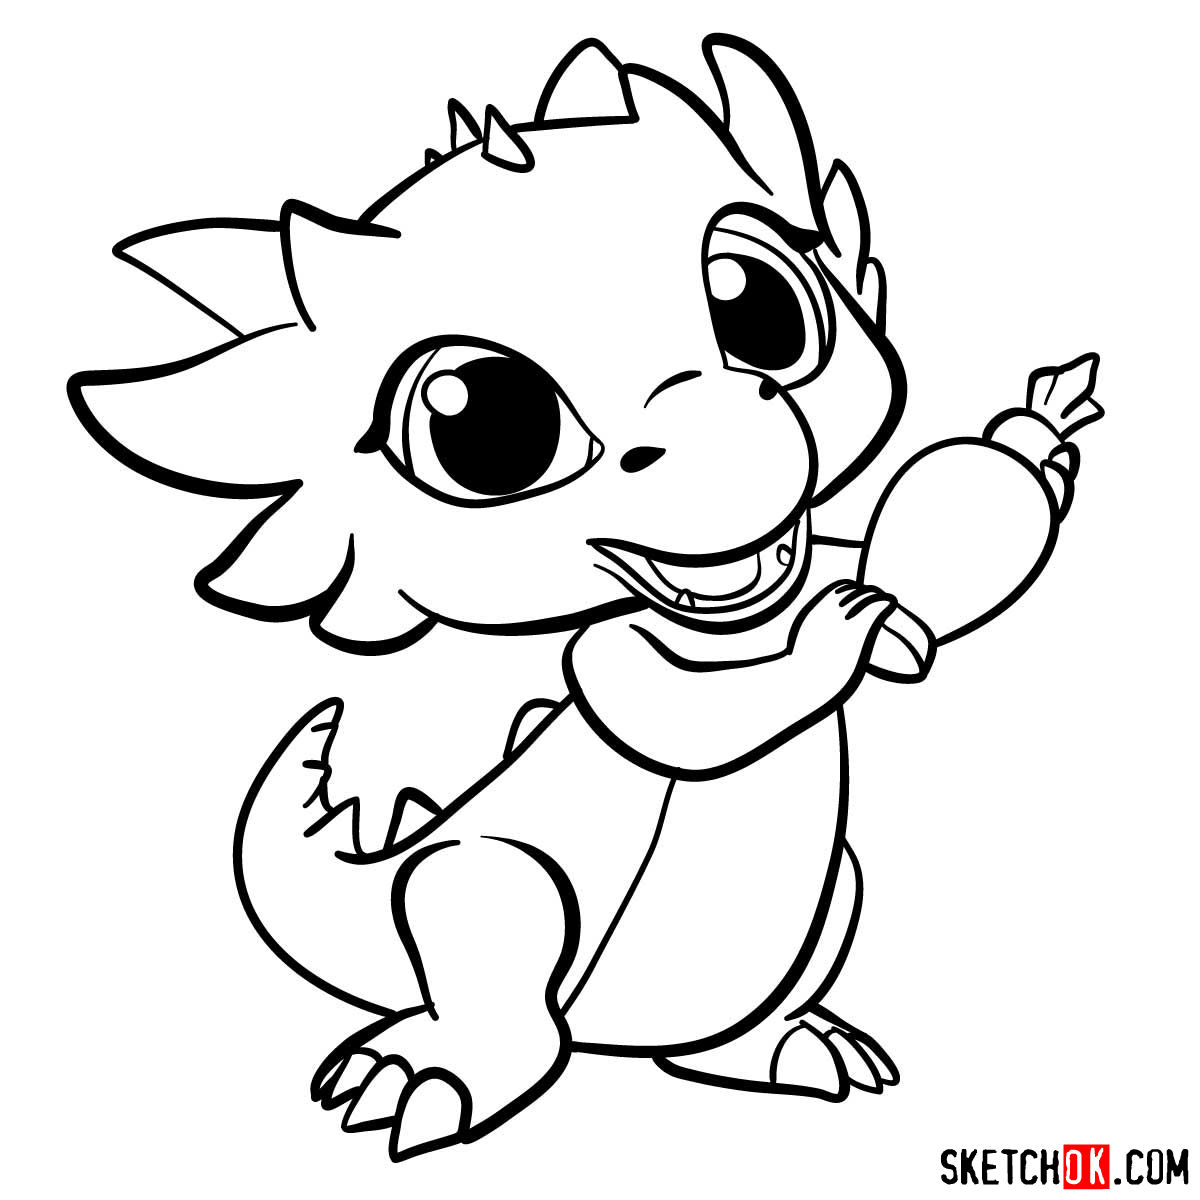 How to draw Nazboo the dragon pet from Shimmer and Shine